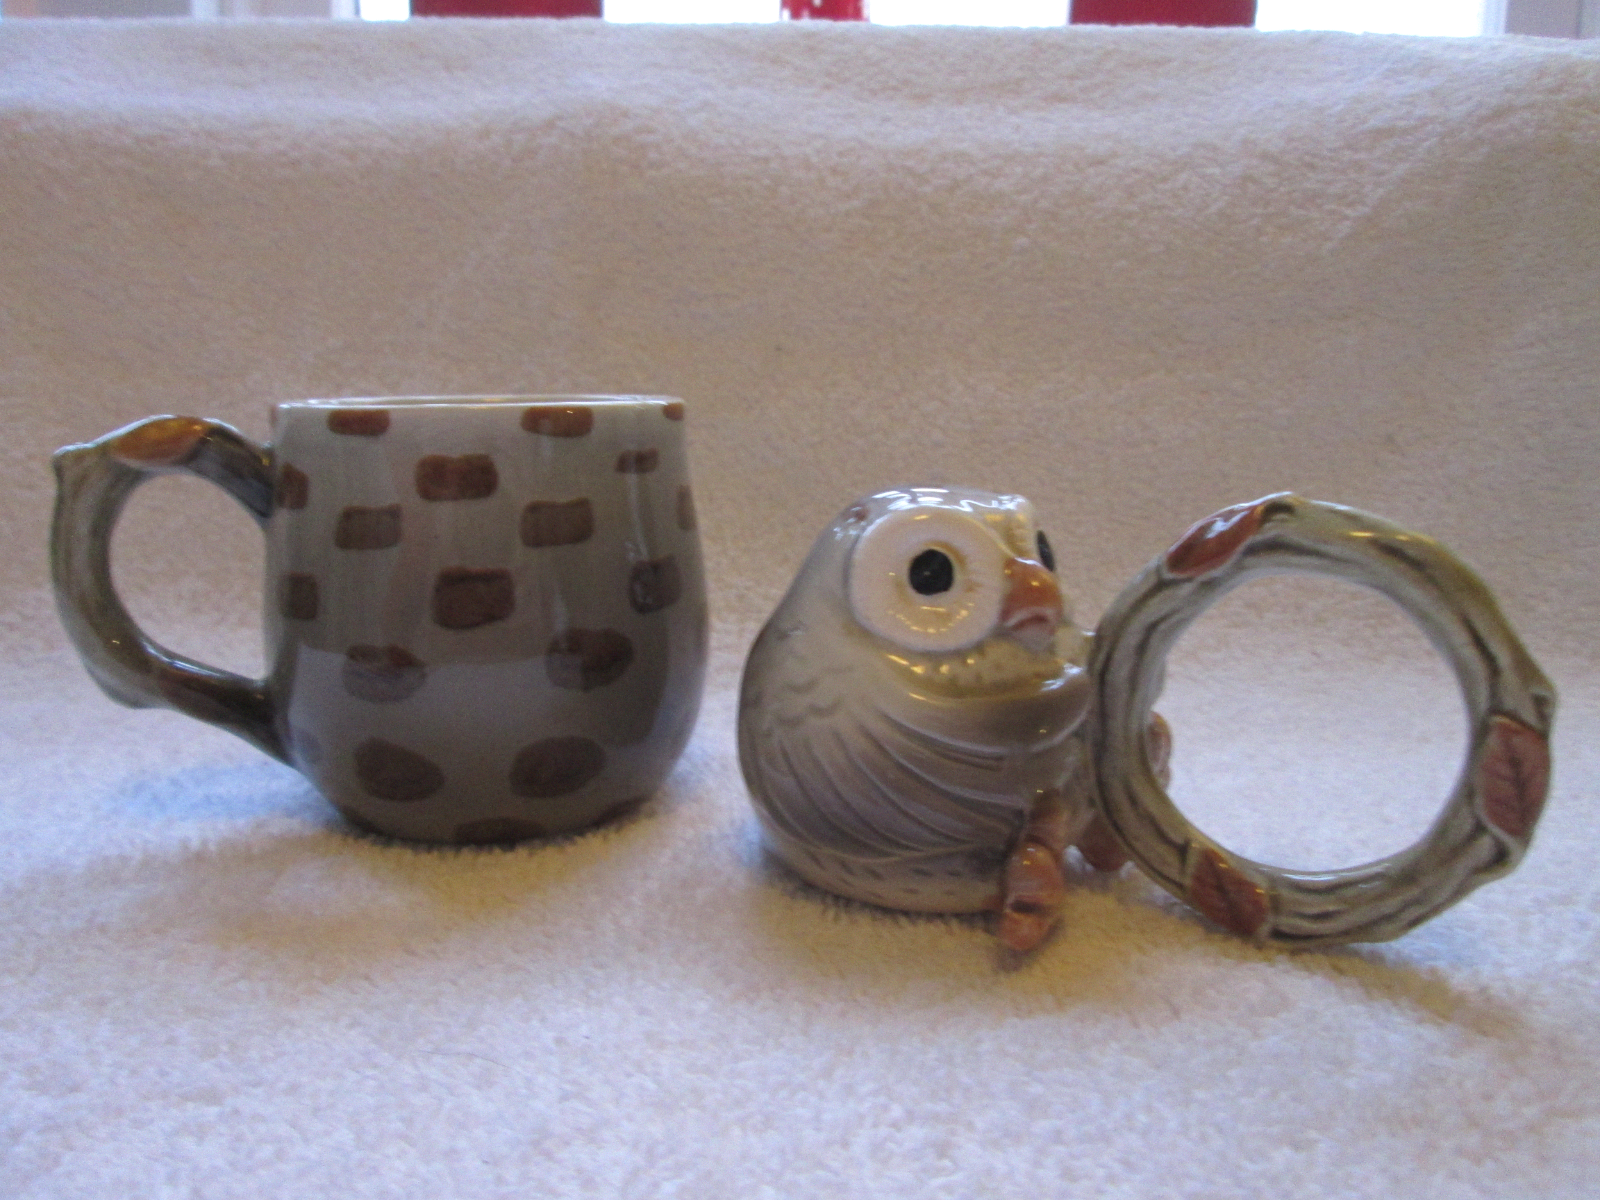 Primary image for Fitz & Floyd owl napkin ring and demitasse cup/mug, Japan